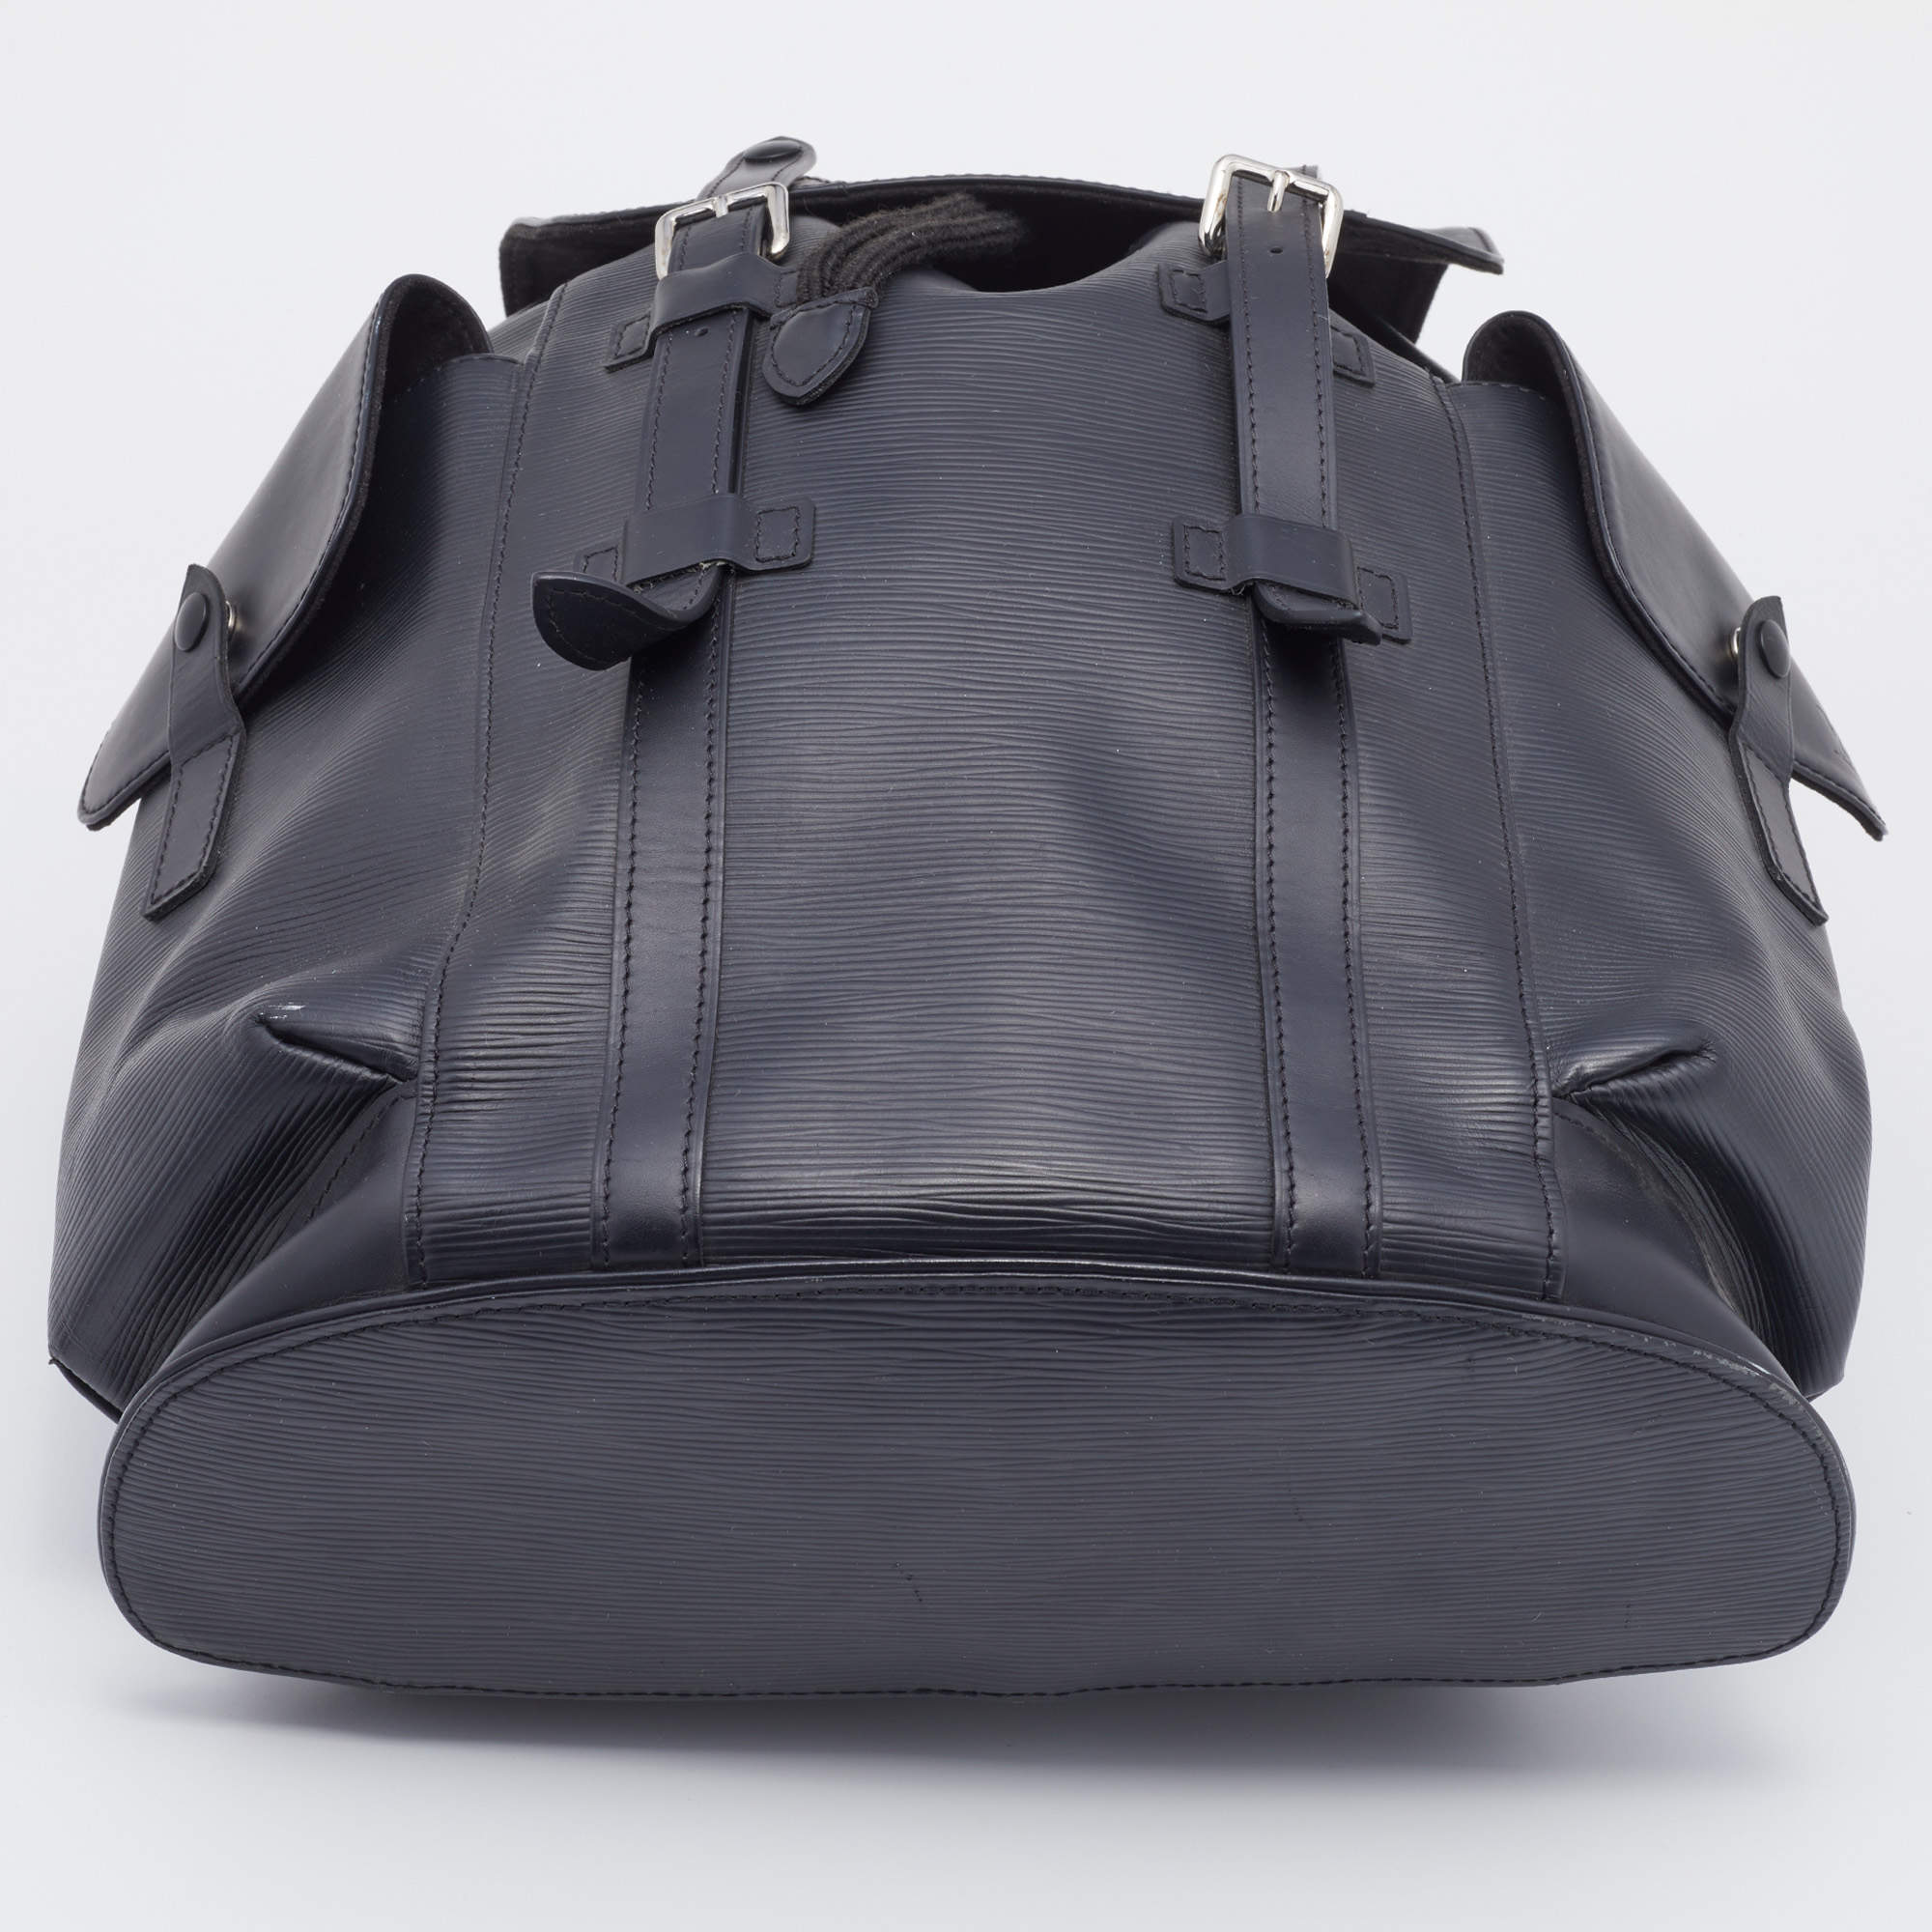 Christopher backpack leather bag Louis Vuitton Grey in Leather - 35070313